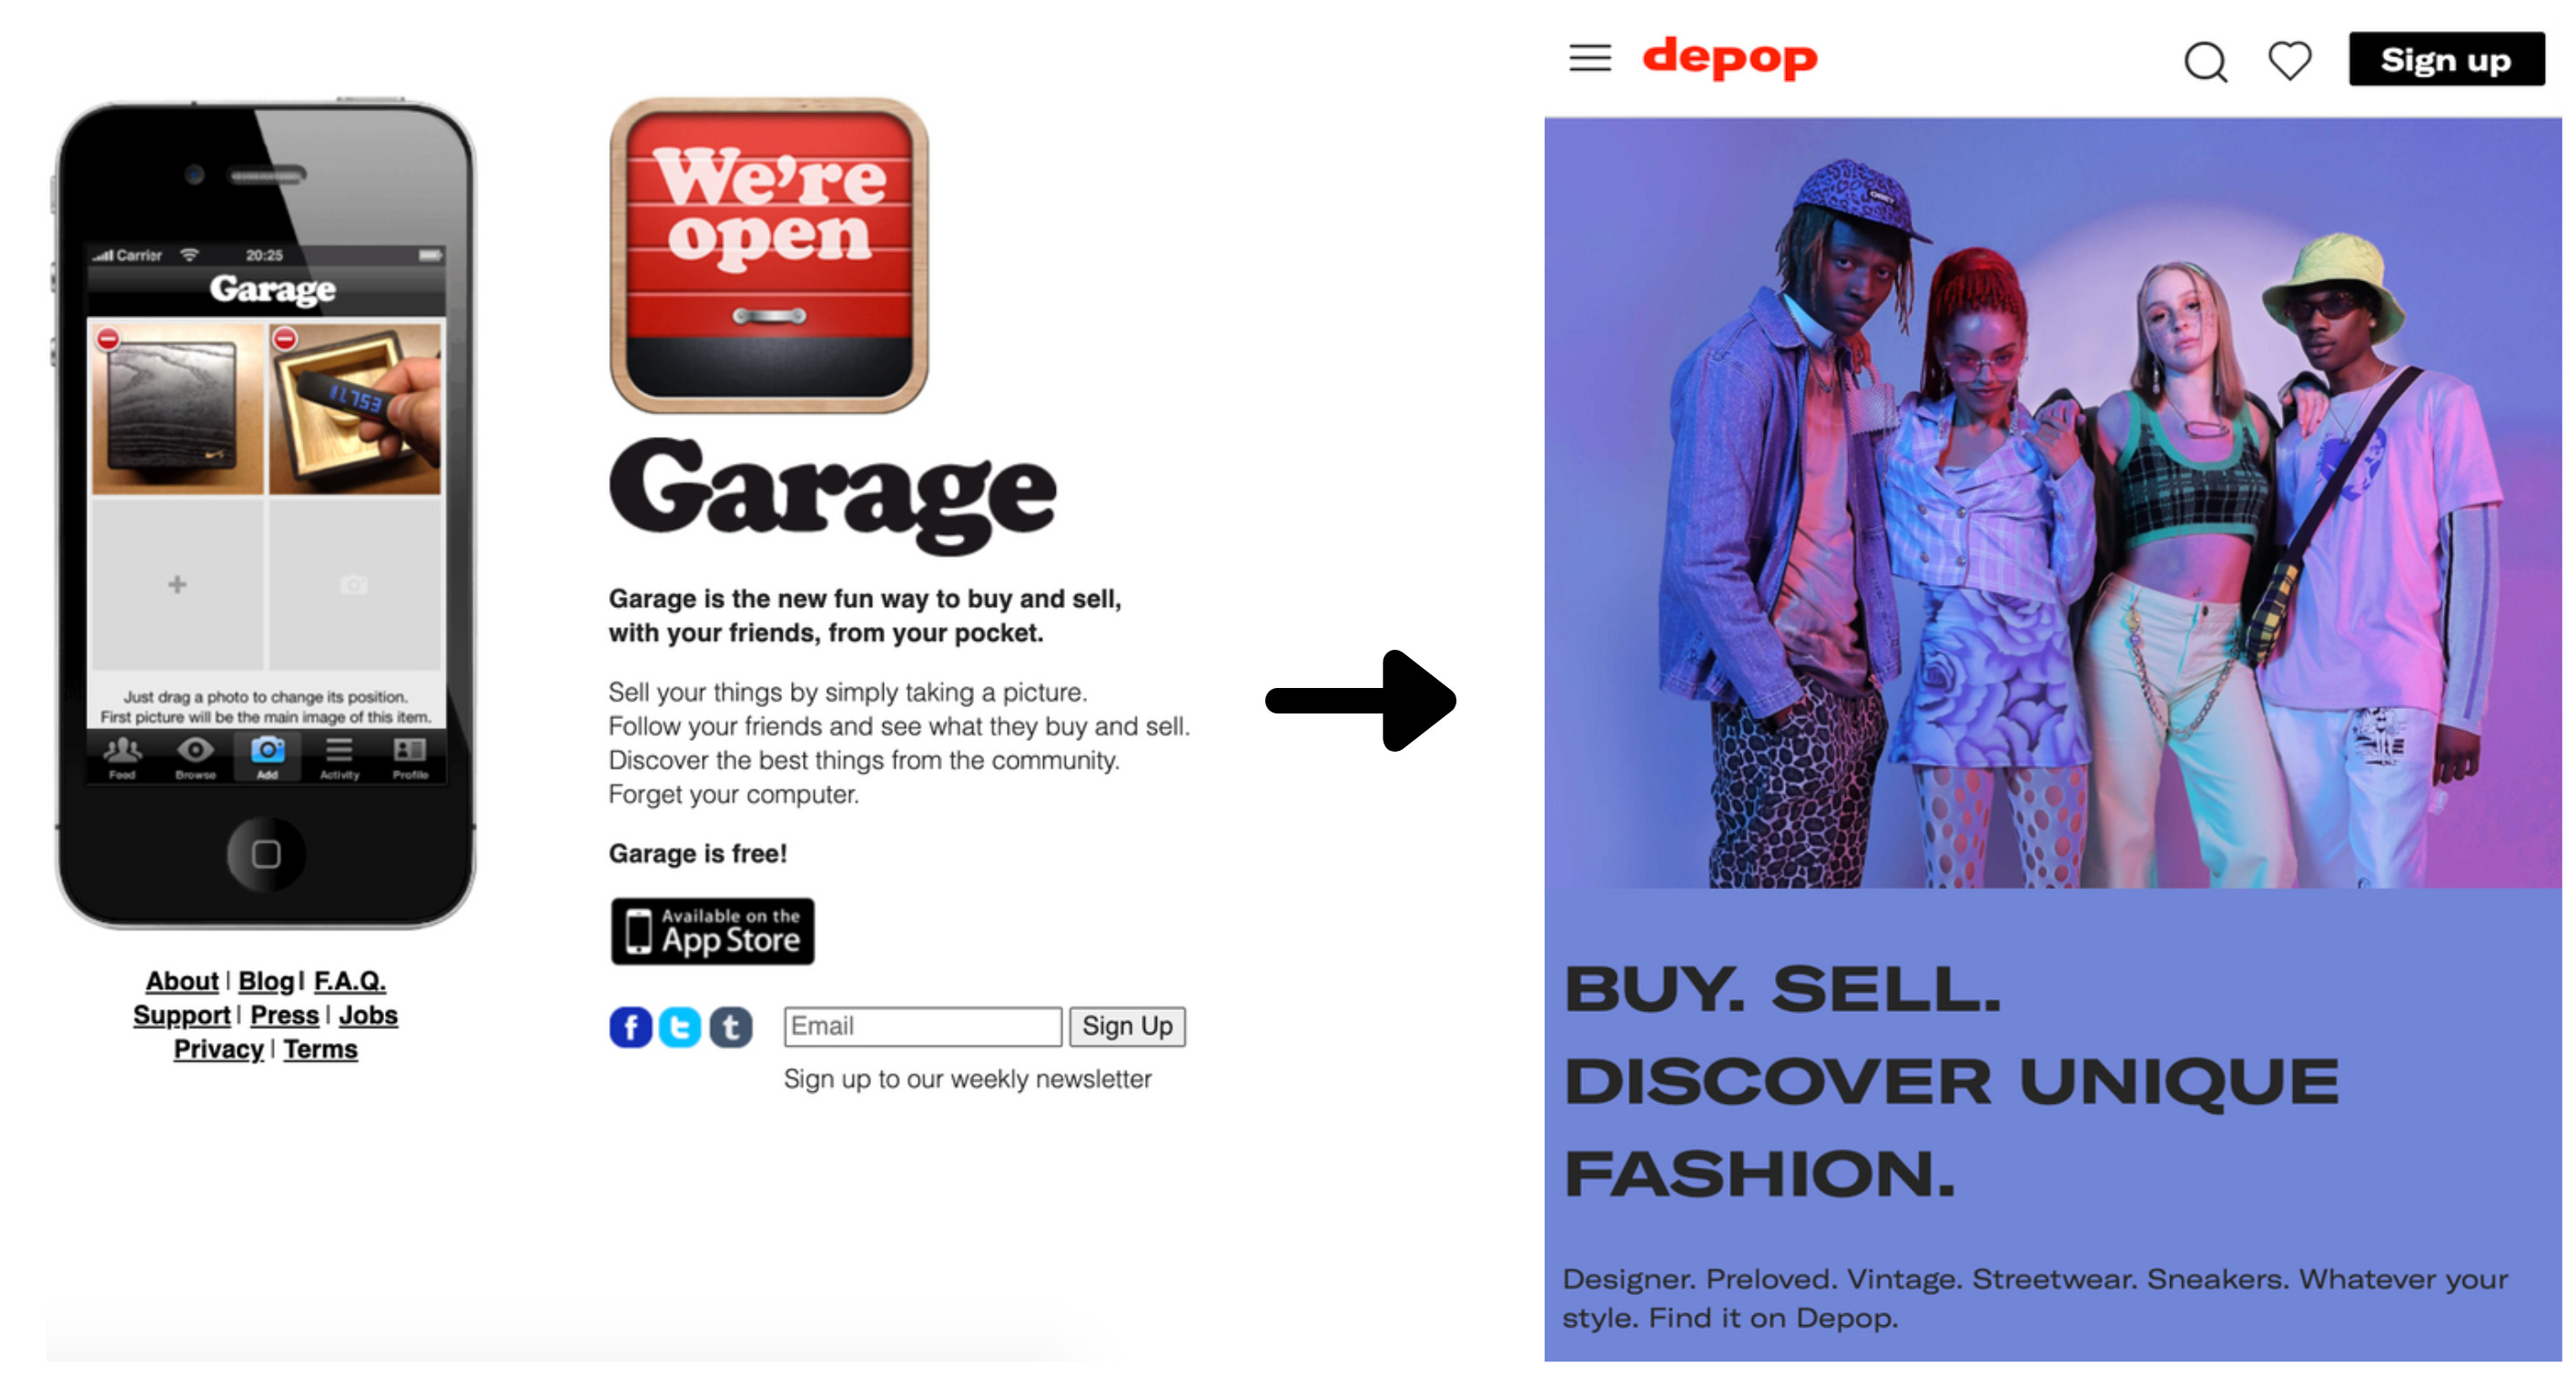 How to become a Top Seller - Depop Blog